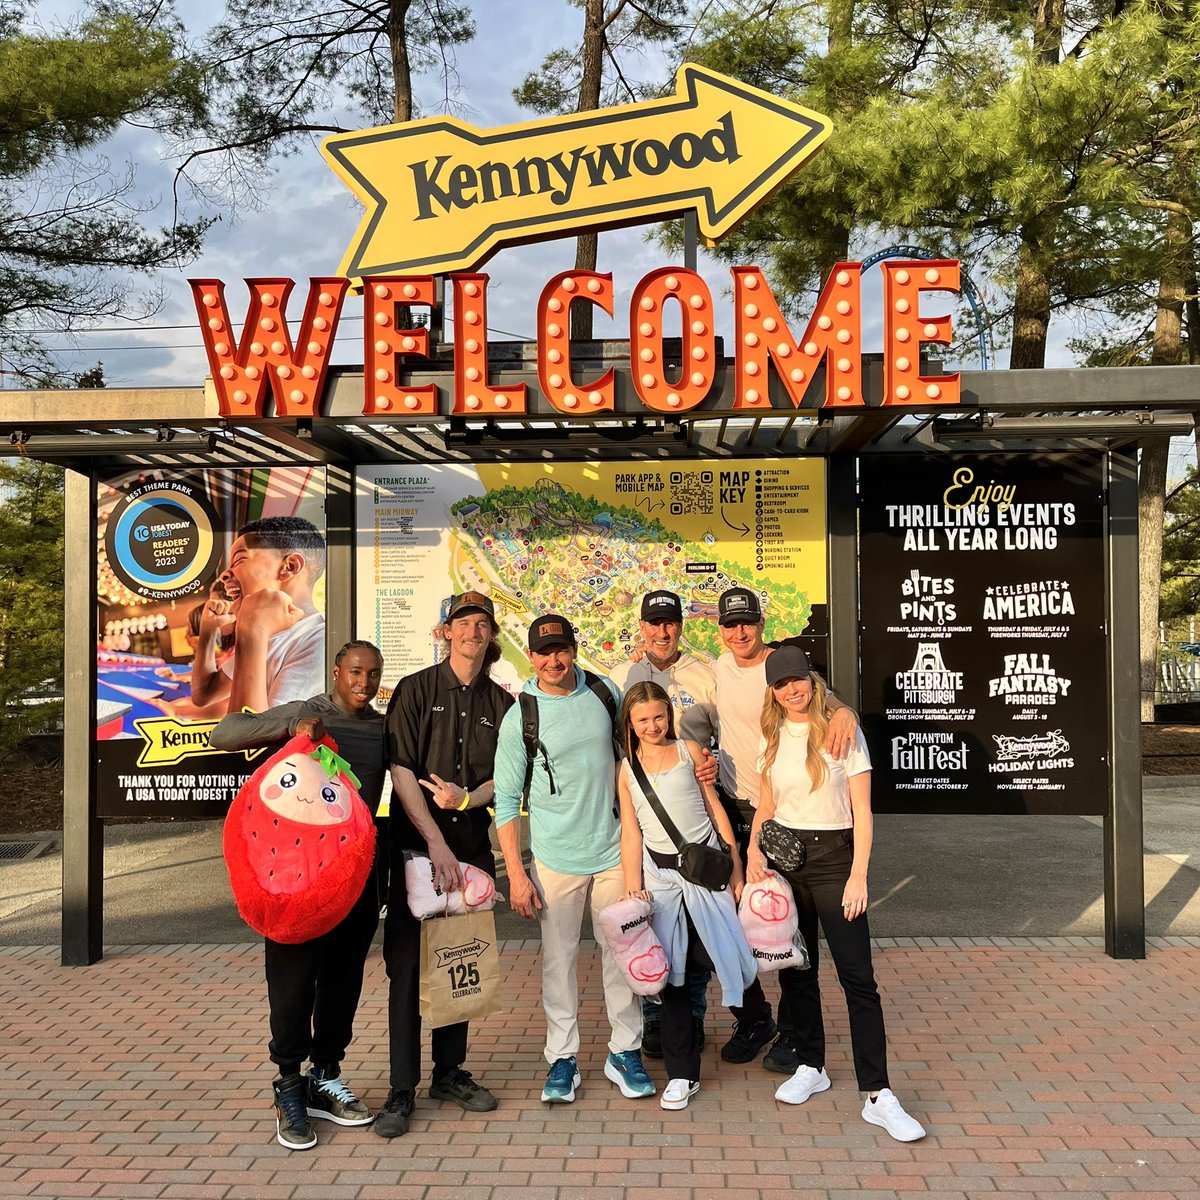 Special thanks to Mayor of Kingstown star @JeremyRenner, his family and fellow crew members for hanging with us today! Mayor of Kingstown films locally – you can even spot Kennywood in a few shots. Thanks to all for a great day!